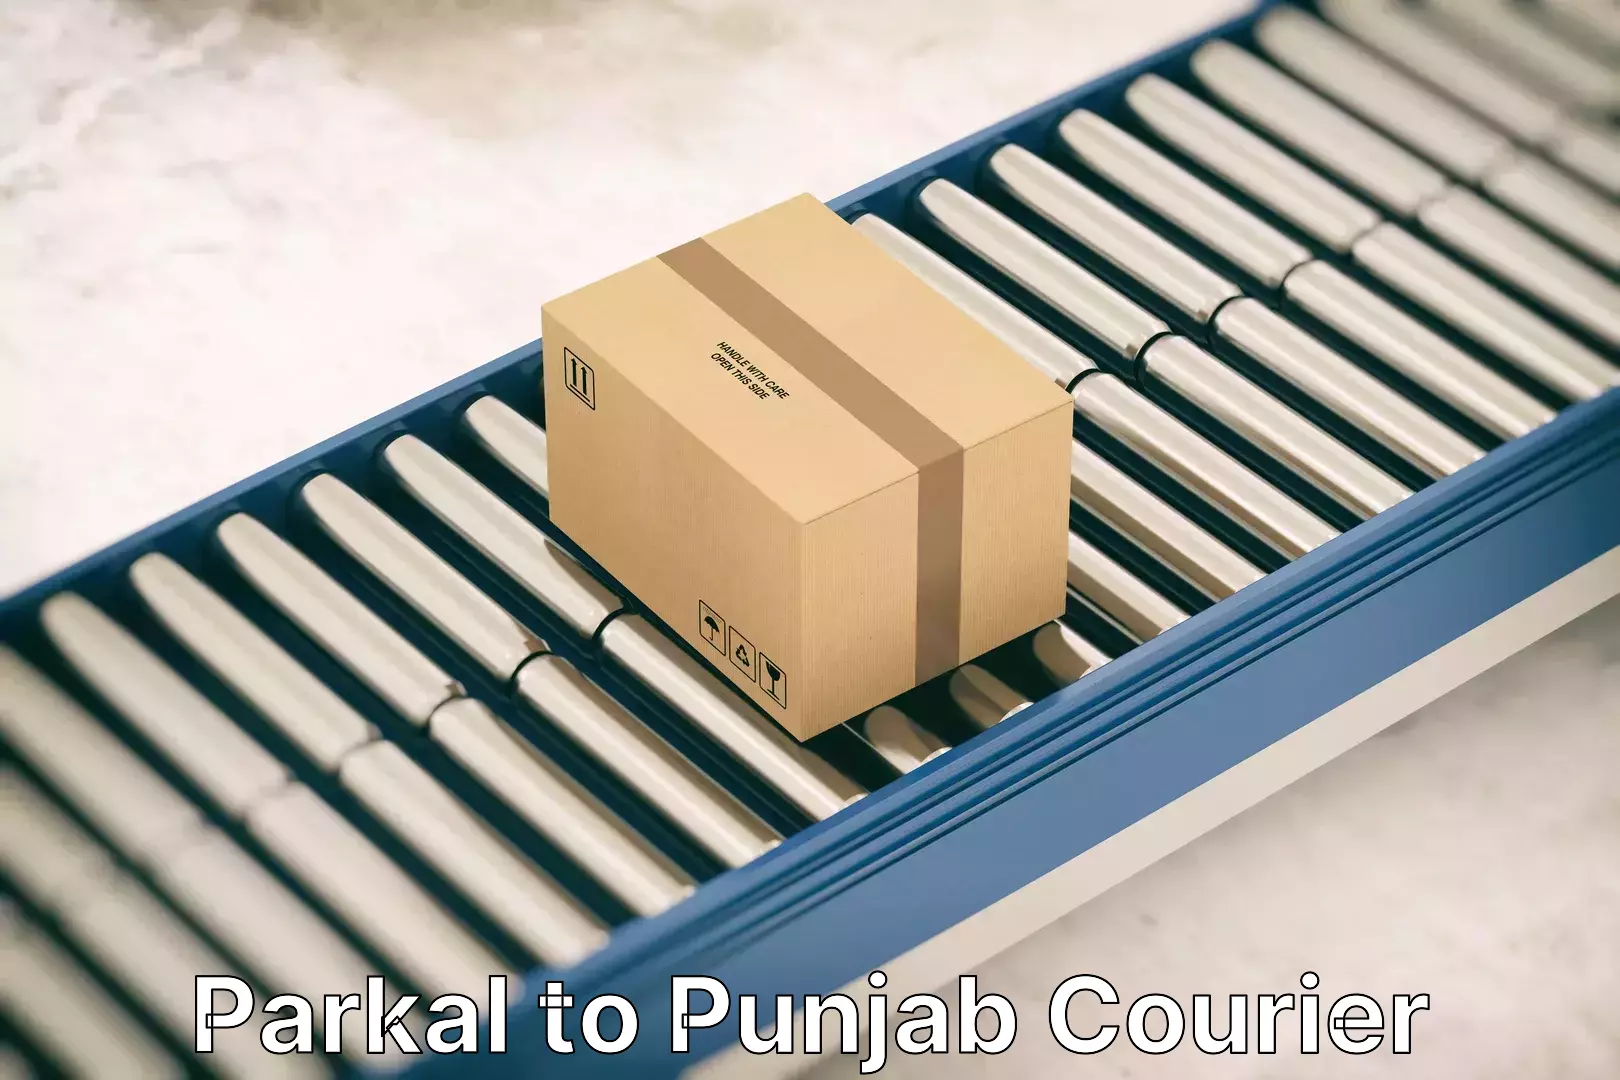 Home relocation services Parkal to Punjab